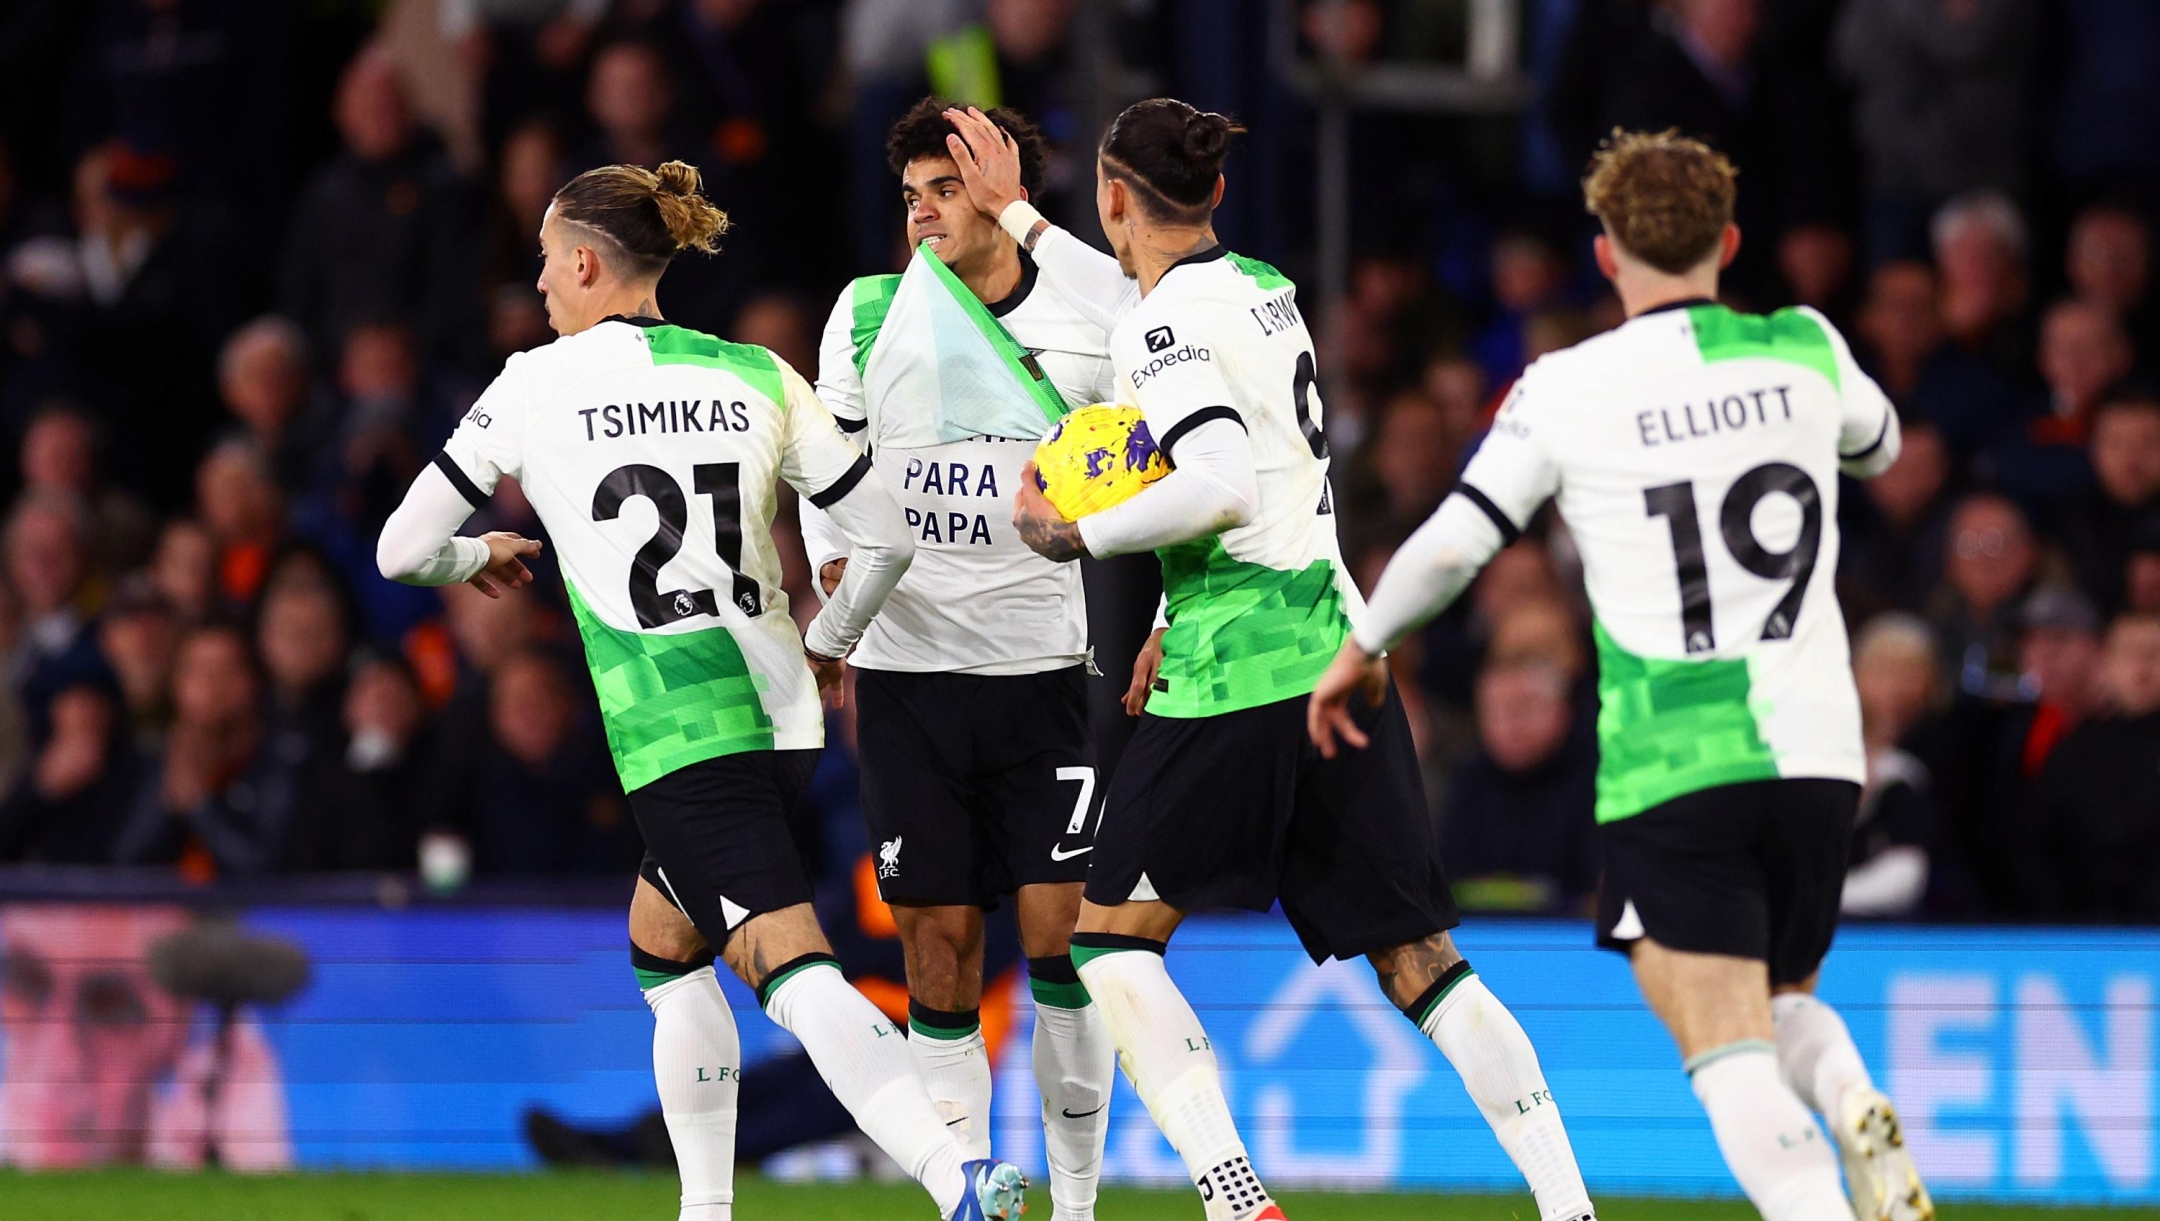 LUTON, ENGLAND - NOVEMBER 05: Luis Diaz of Liverpool celebrates with teammates after scoring the team's first goal to equalise by revealing a message underneath his match shirt which reads 'libertad para papa' translating to 'freedom for my father' during the Premier League match between Luton Town and Liverpool FC at Kenilworth Road on November 05, 2023 in Luton, England. (Photo by Clive Rose/Getty Images)